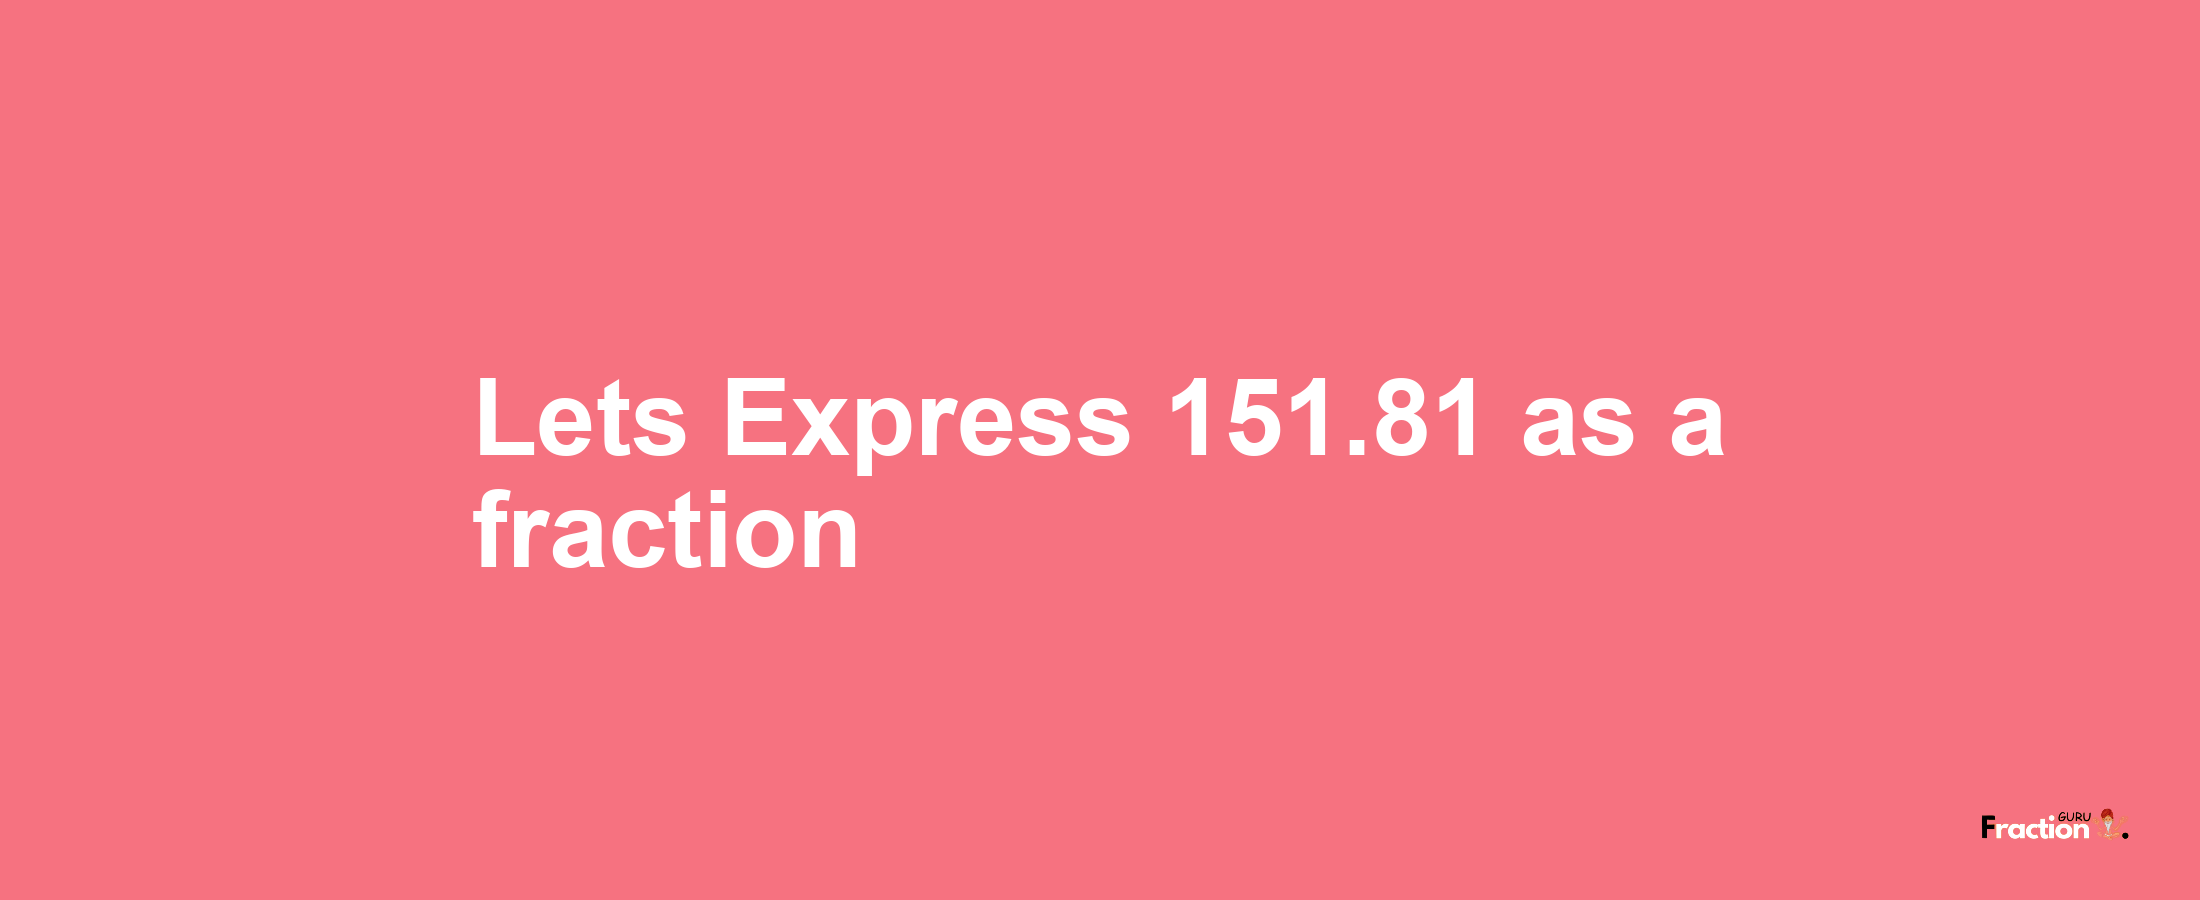 Lets Express 151.81 as afraction